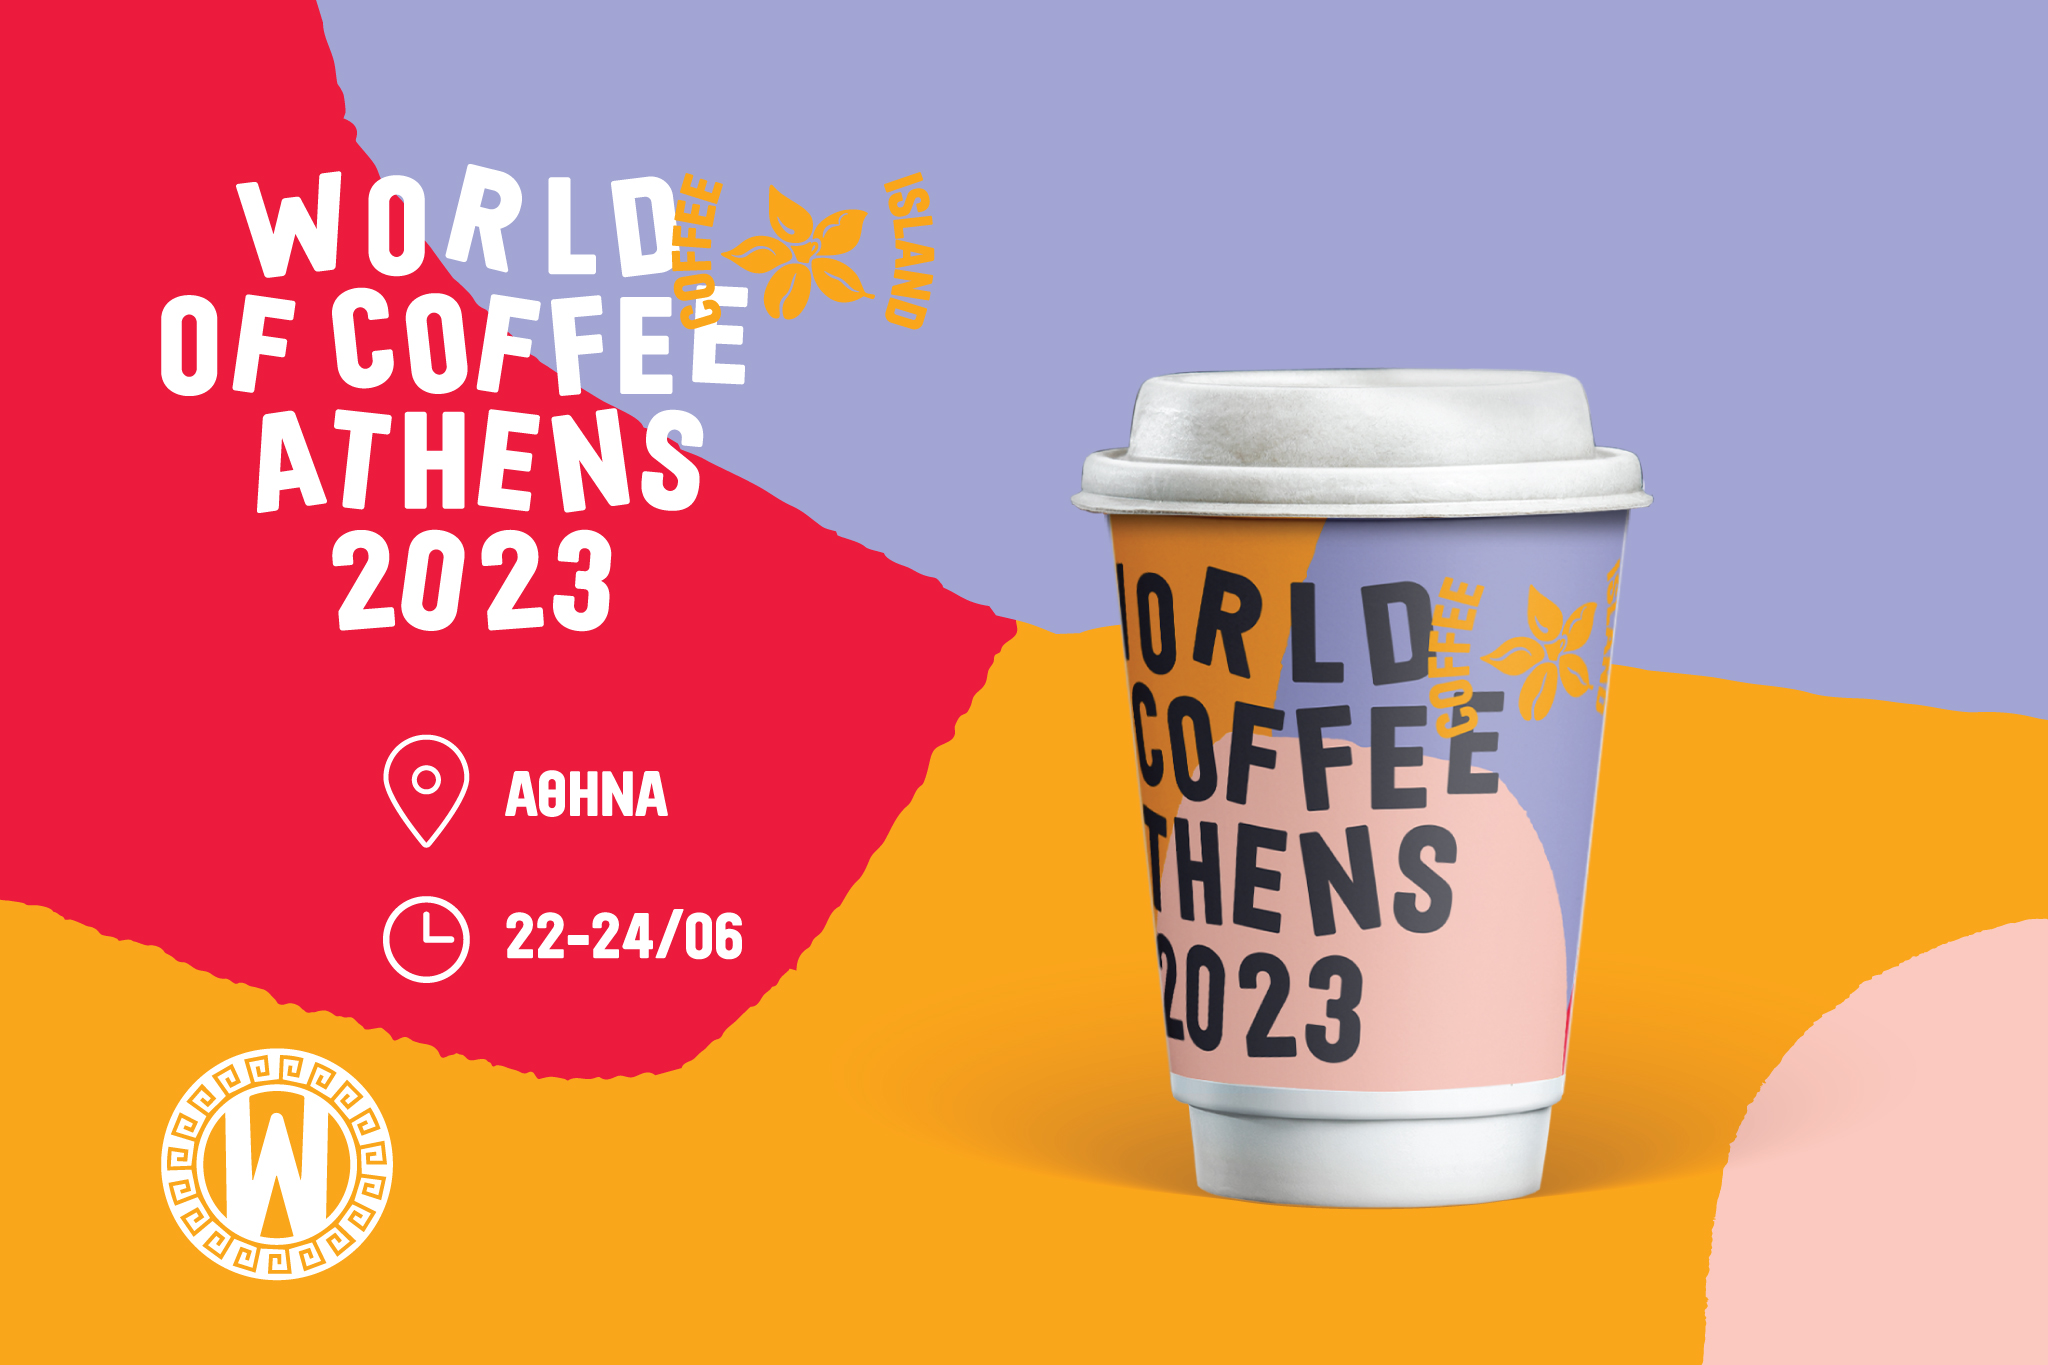 We celebrate the World Of Coffee by offering the unique Competition lot Sidra coffee